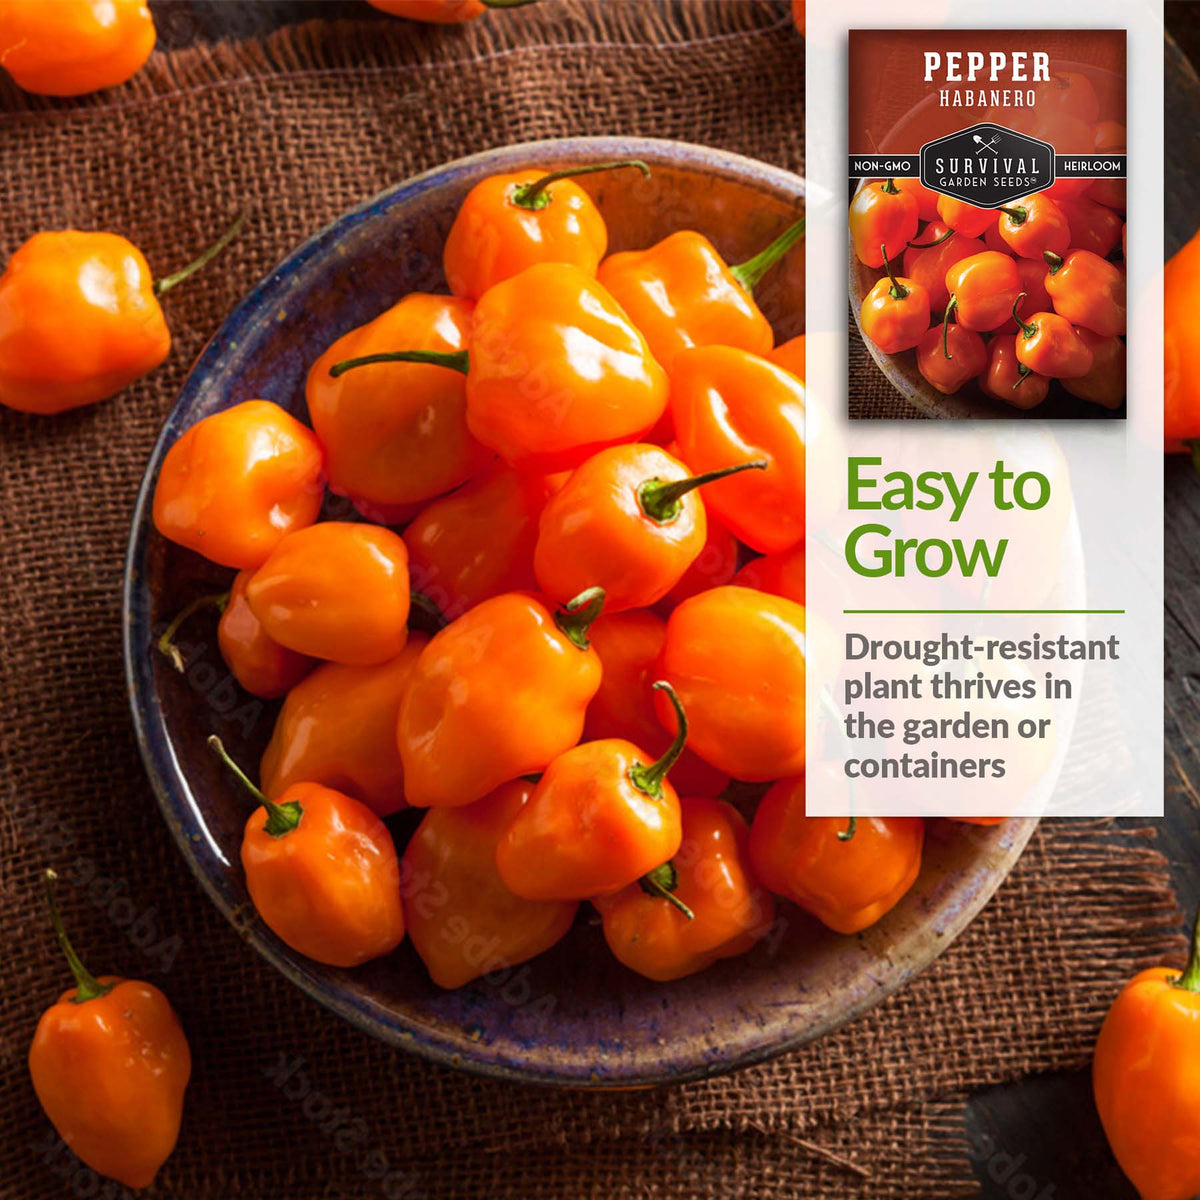 Habanero peppers are easy to grow and drought resistant